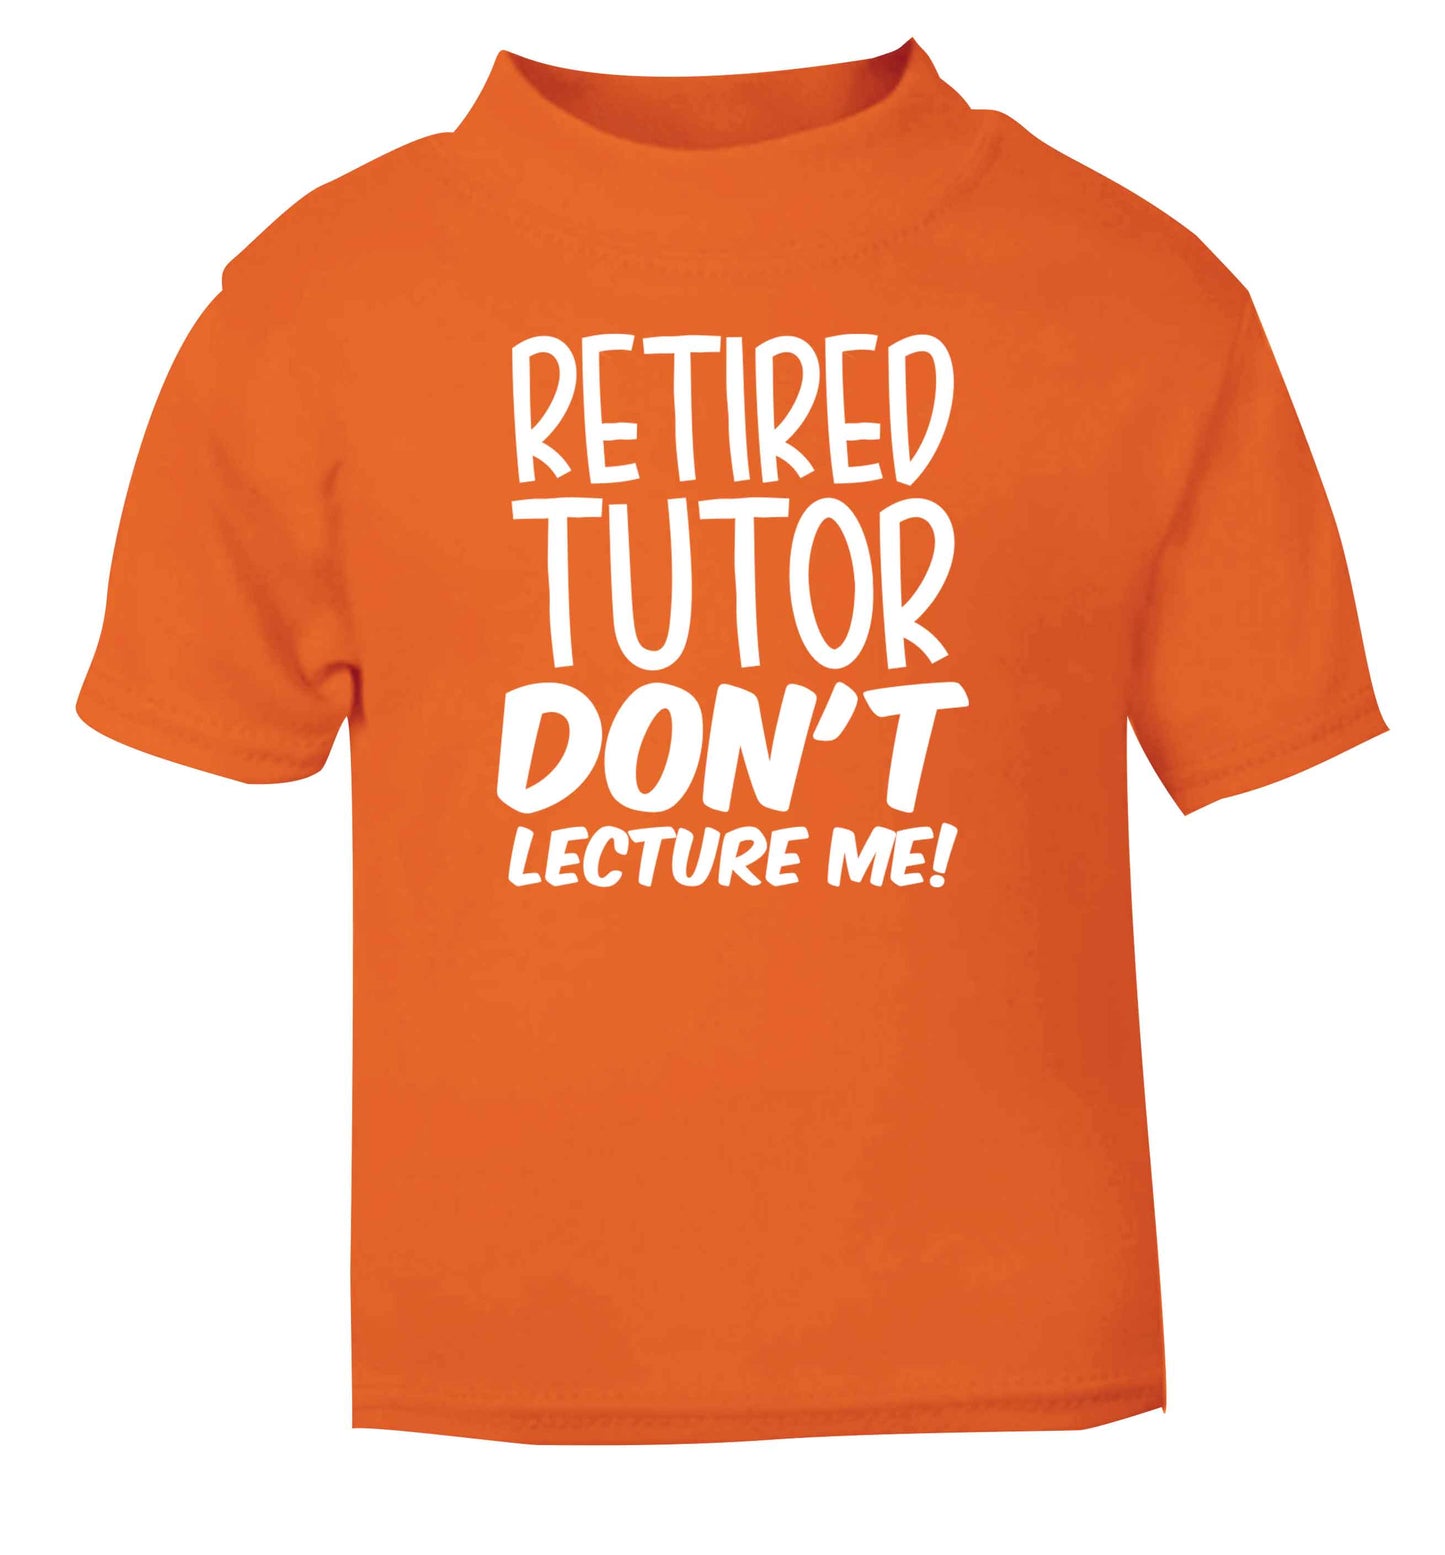 Retired tutor don't lecture me! orange Baby Toddler Tshirt 2 Years